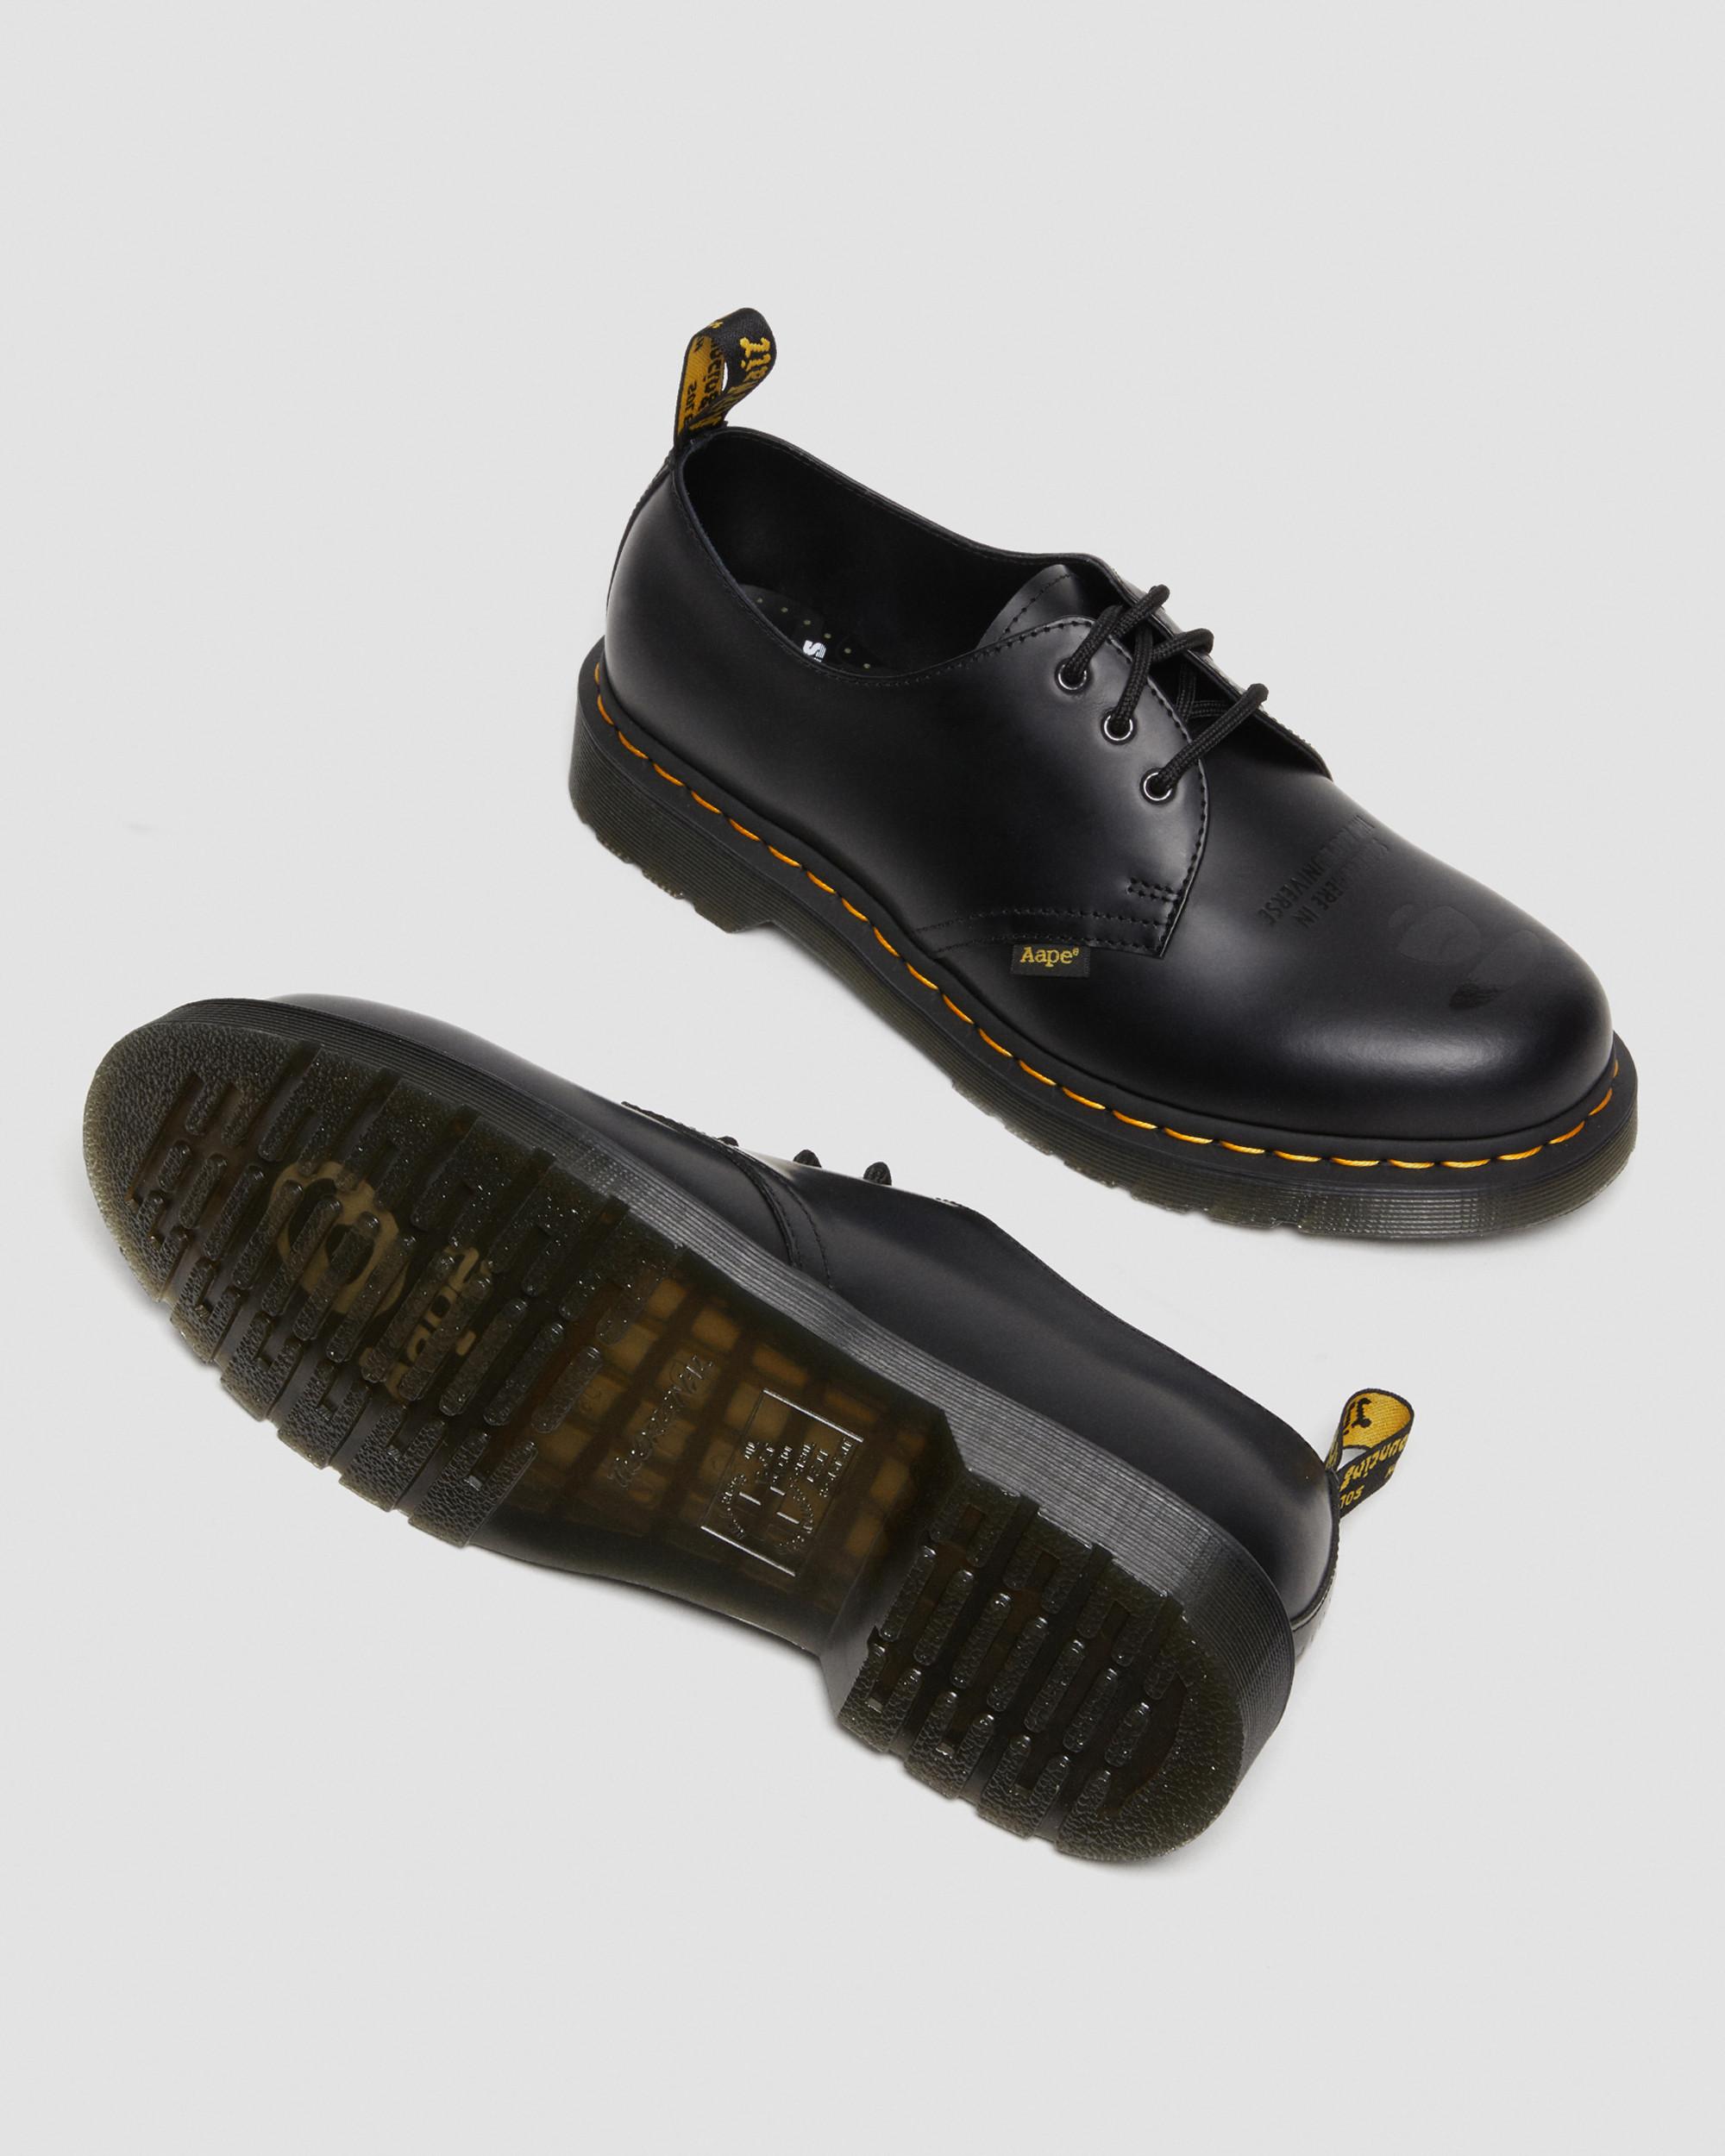 1461 AAPE Smooth Leather Oxford Shoes | Dr. Martens